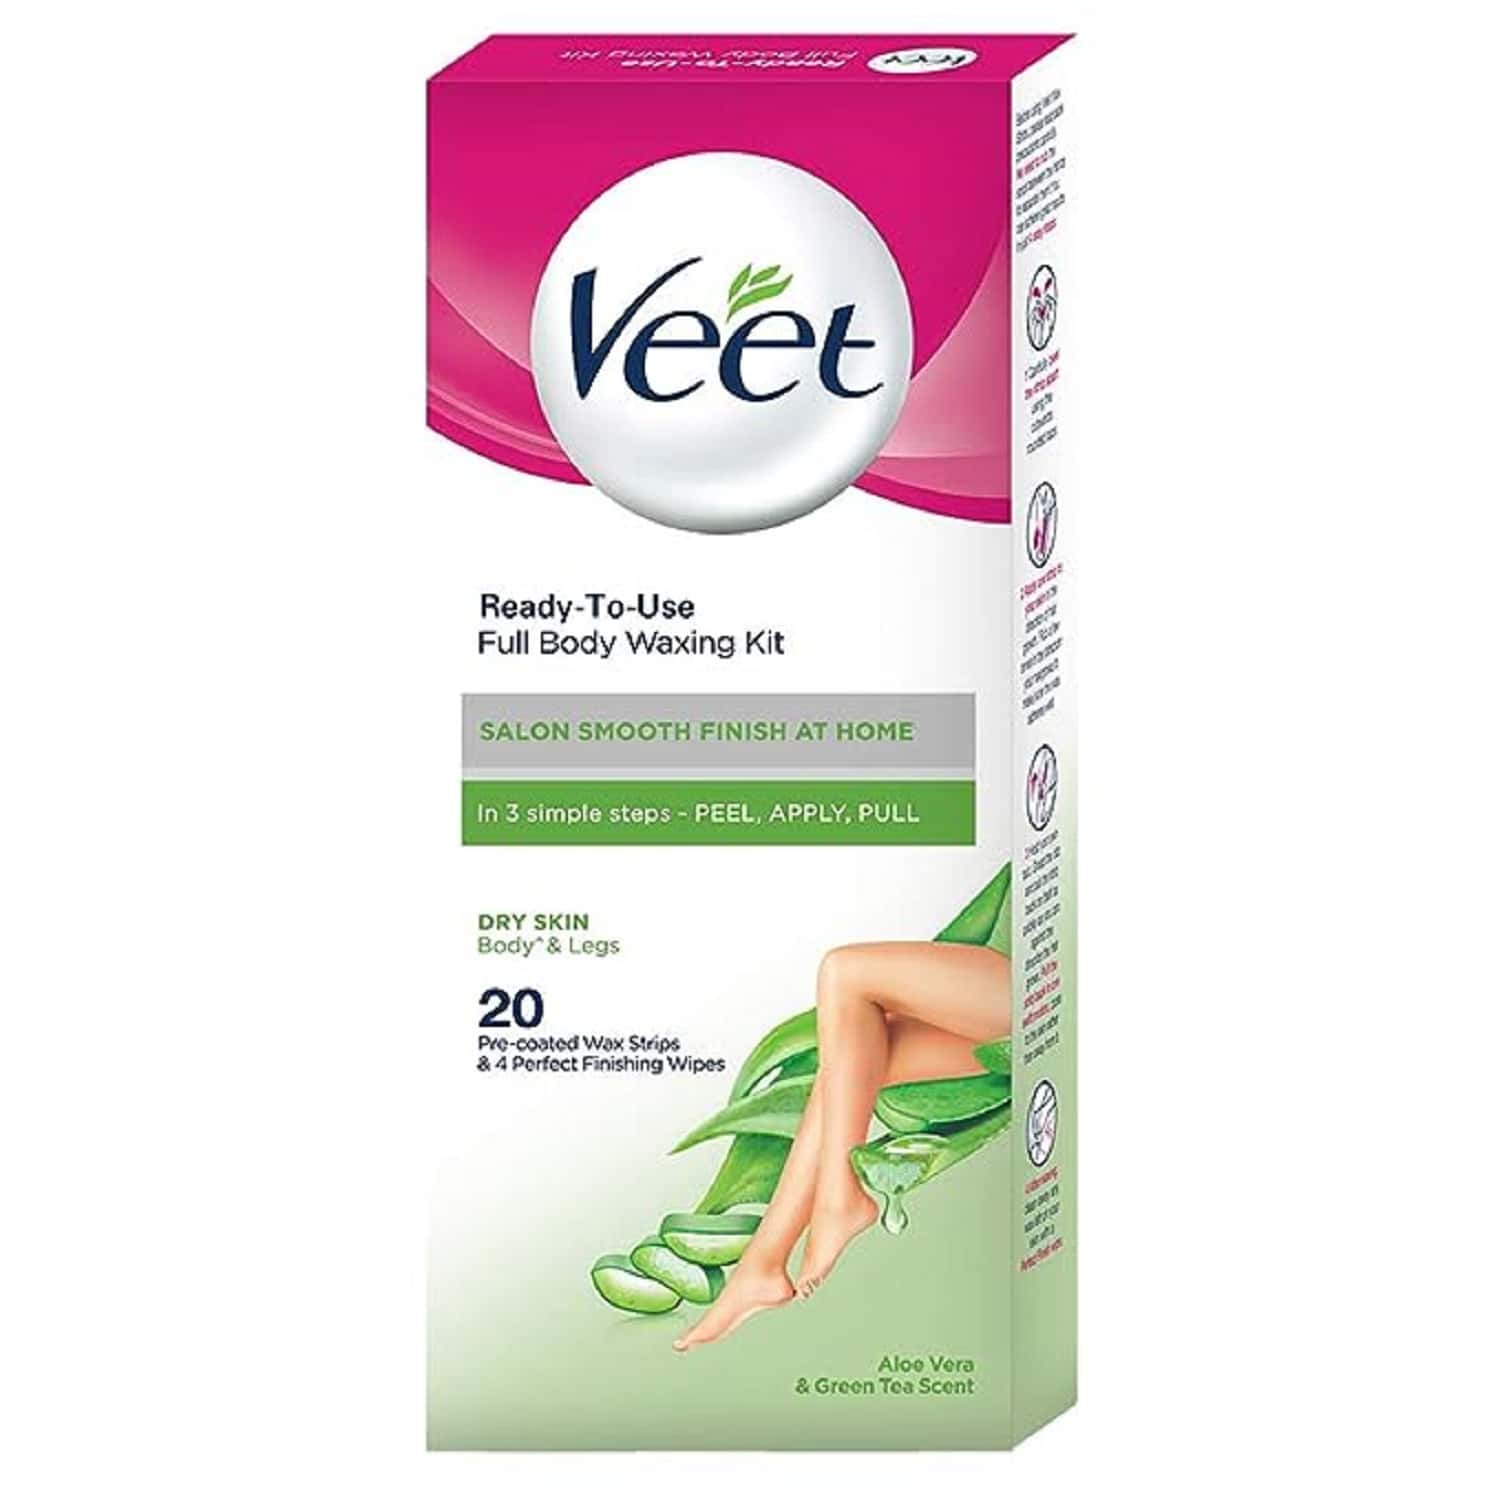 Veet Dry Skin For Body And Legs Aloe Vera & Green Tea Scent 20 Wax Strips With 4 Finishing Wipes